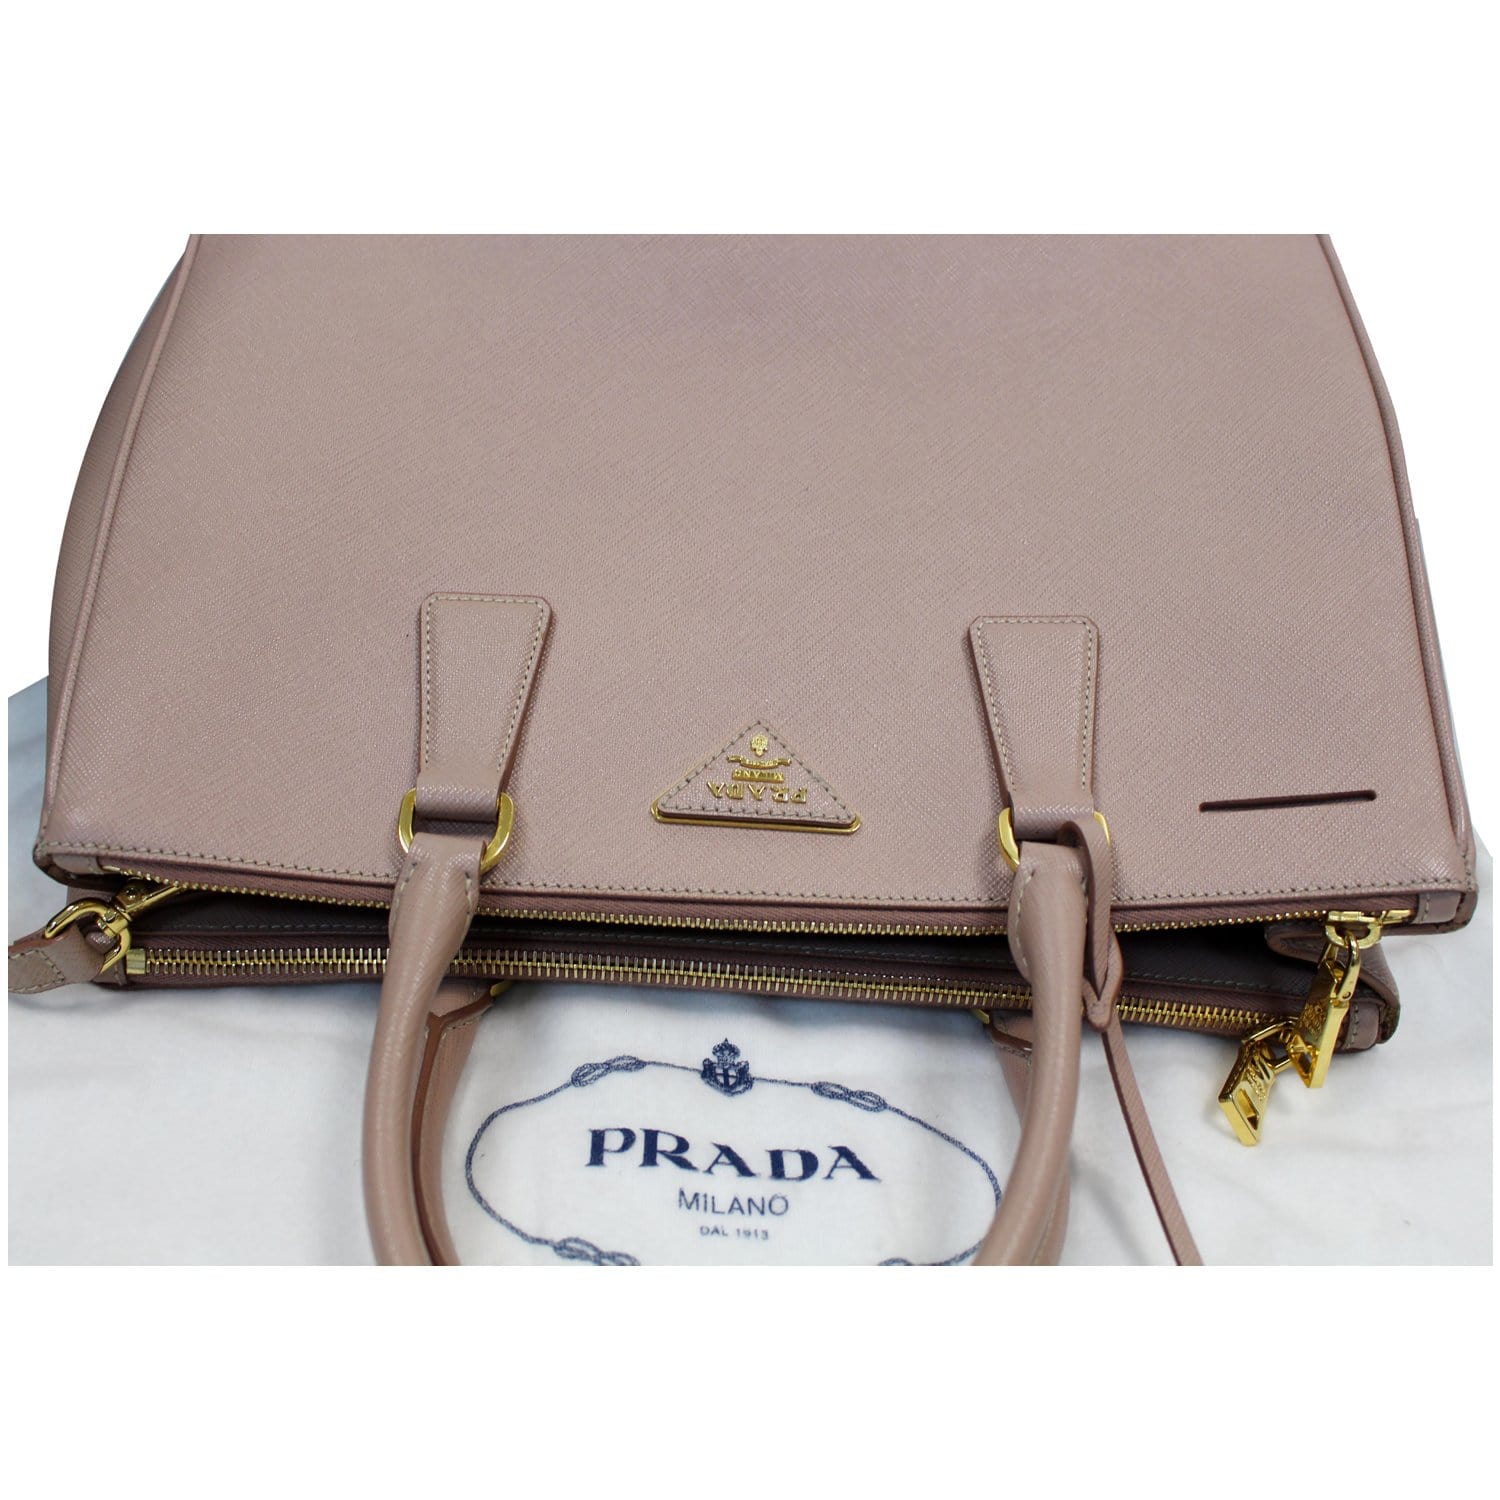 De'lux Bagz - Prada Saffiano Lux Large Tote, size 38 x 26cm, (large size  originally no strap), preloved overall good condition, comes with box, dust  bag and care card only, price RM